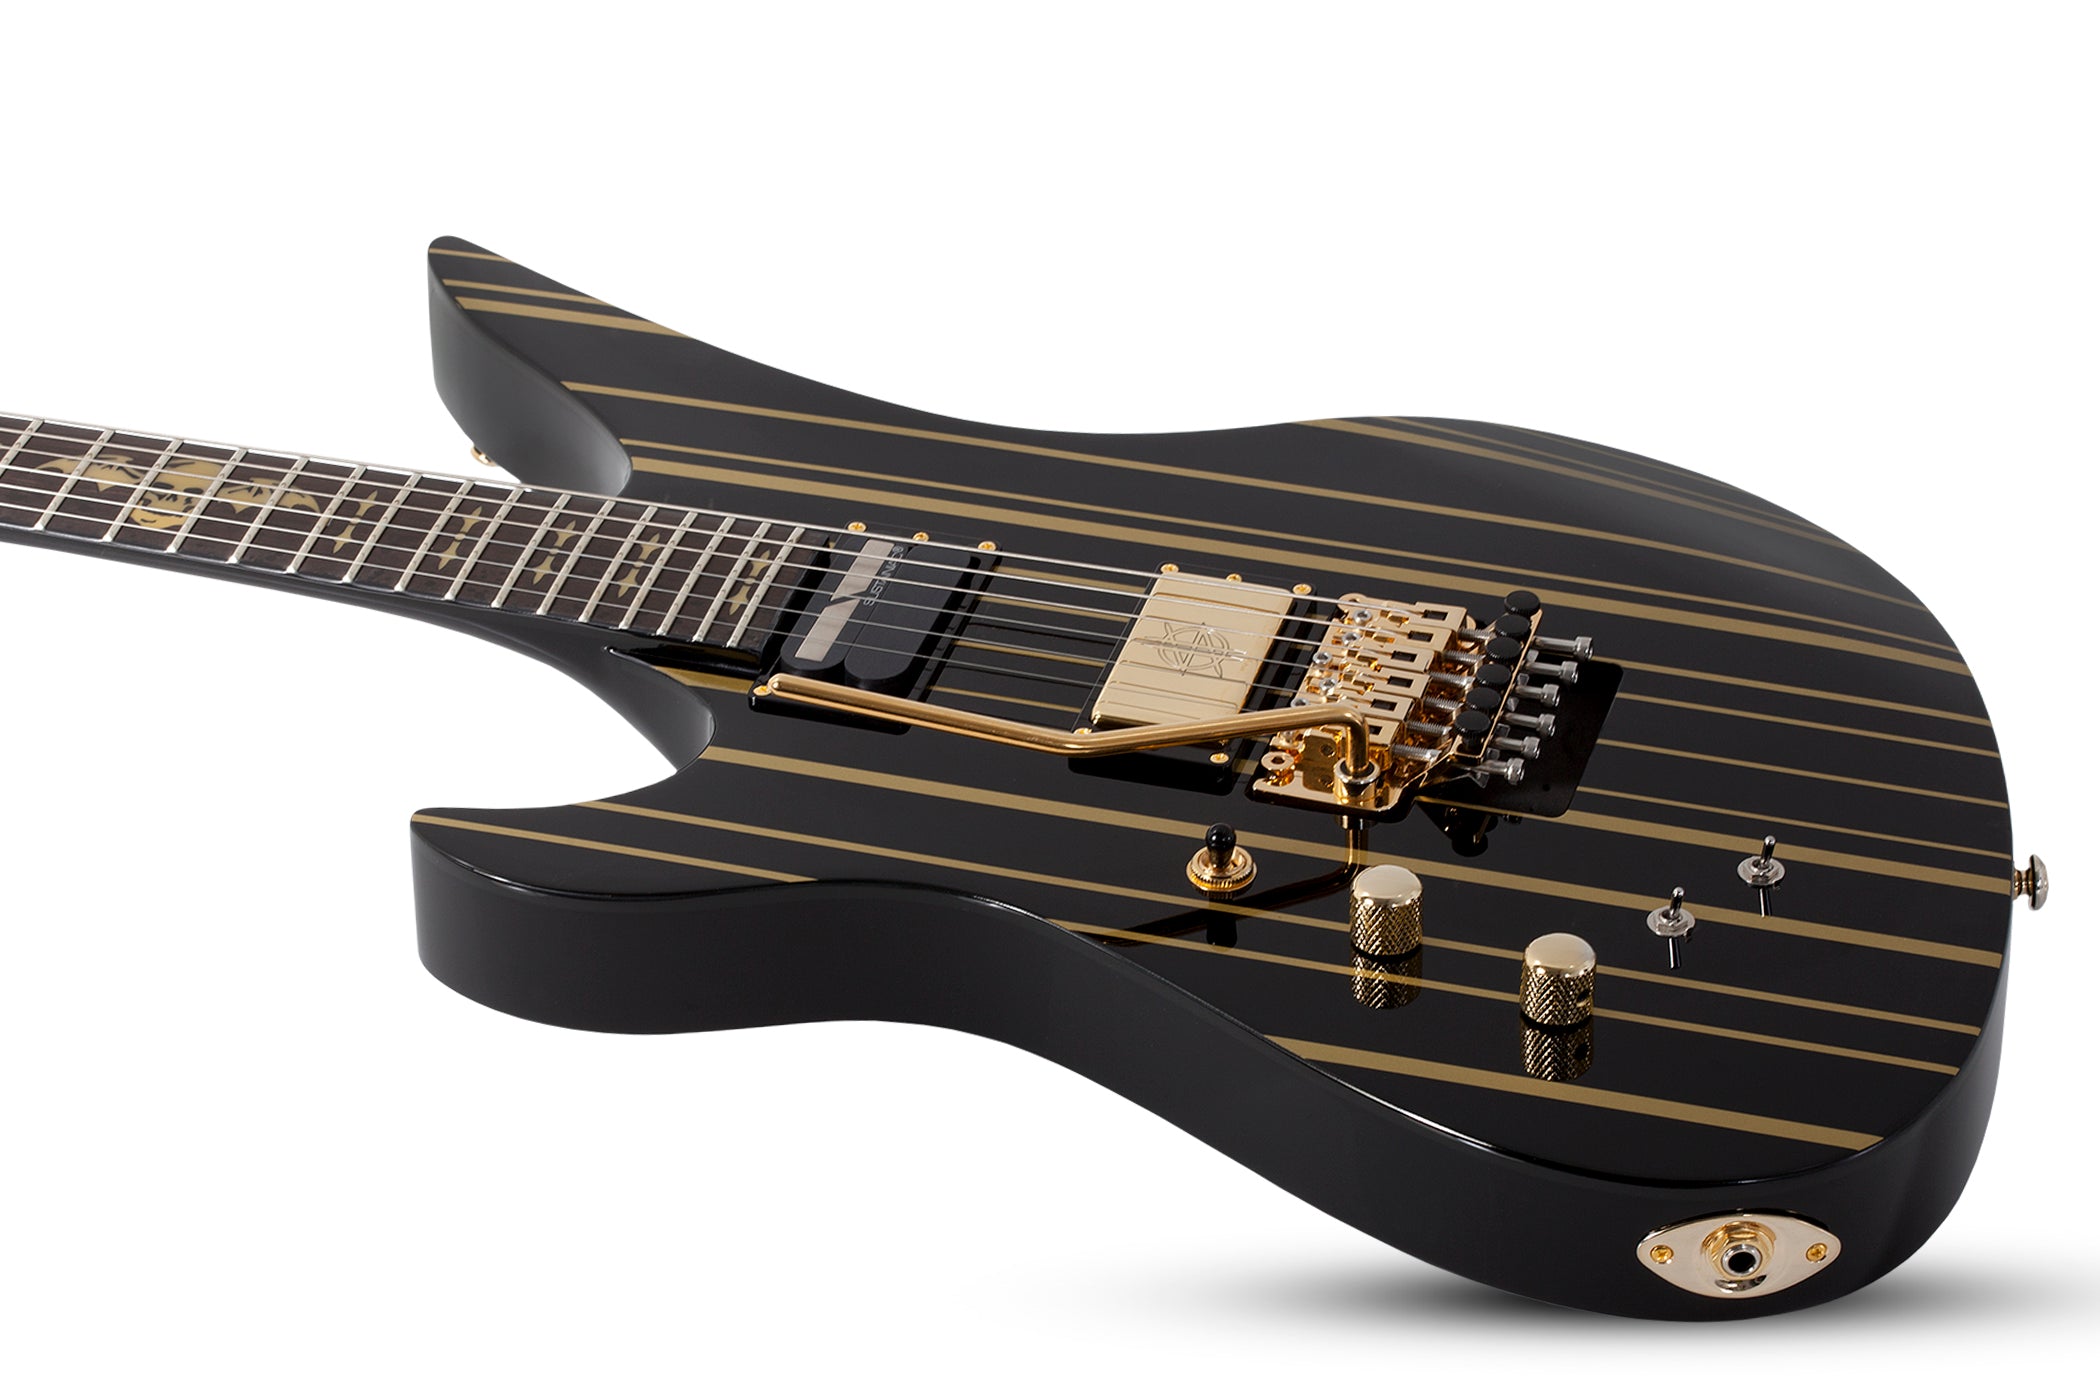 Schecter Synyster Custom-S Left Handed Electric Bass Gloss Black with Gold Stripes 1745-SHC